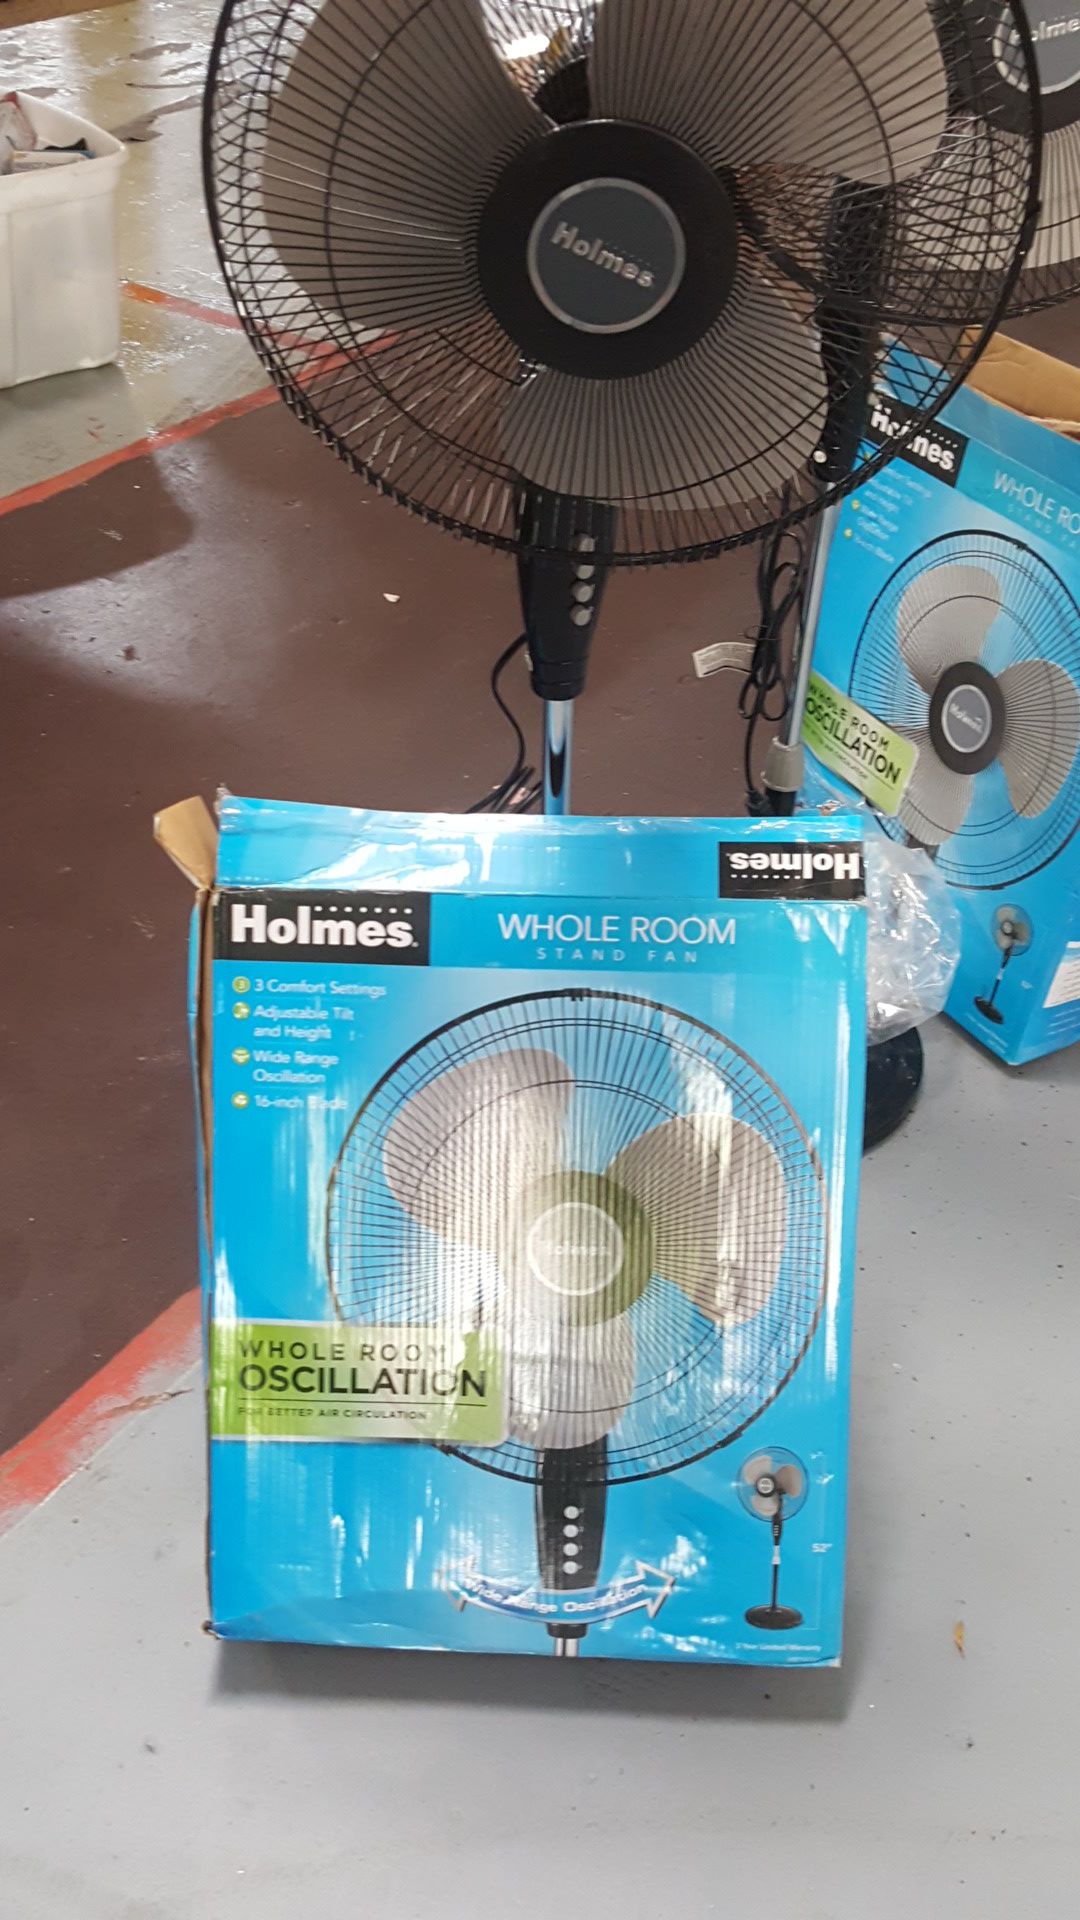 Holmes whole room stand fan